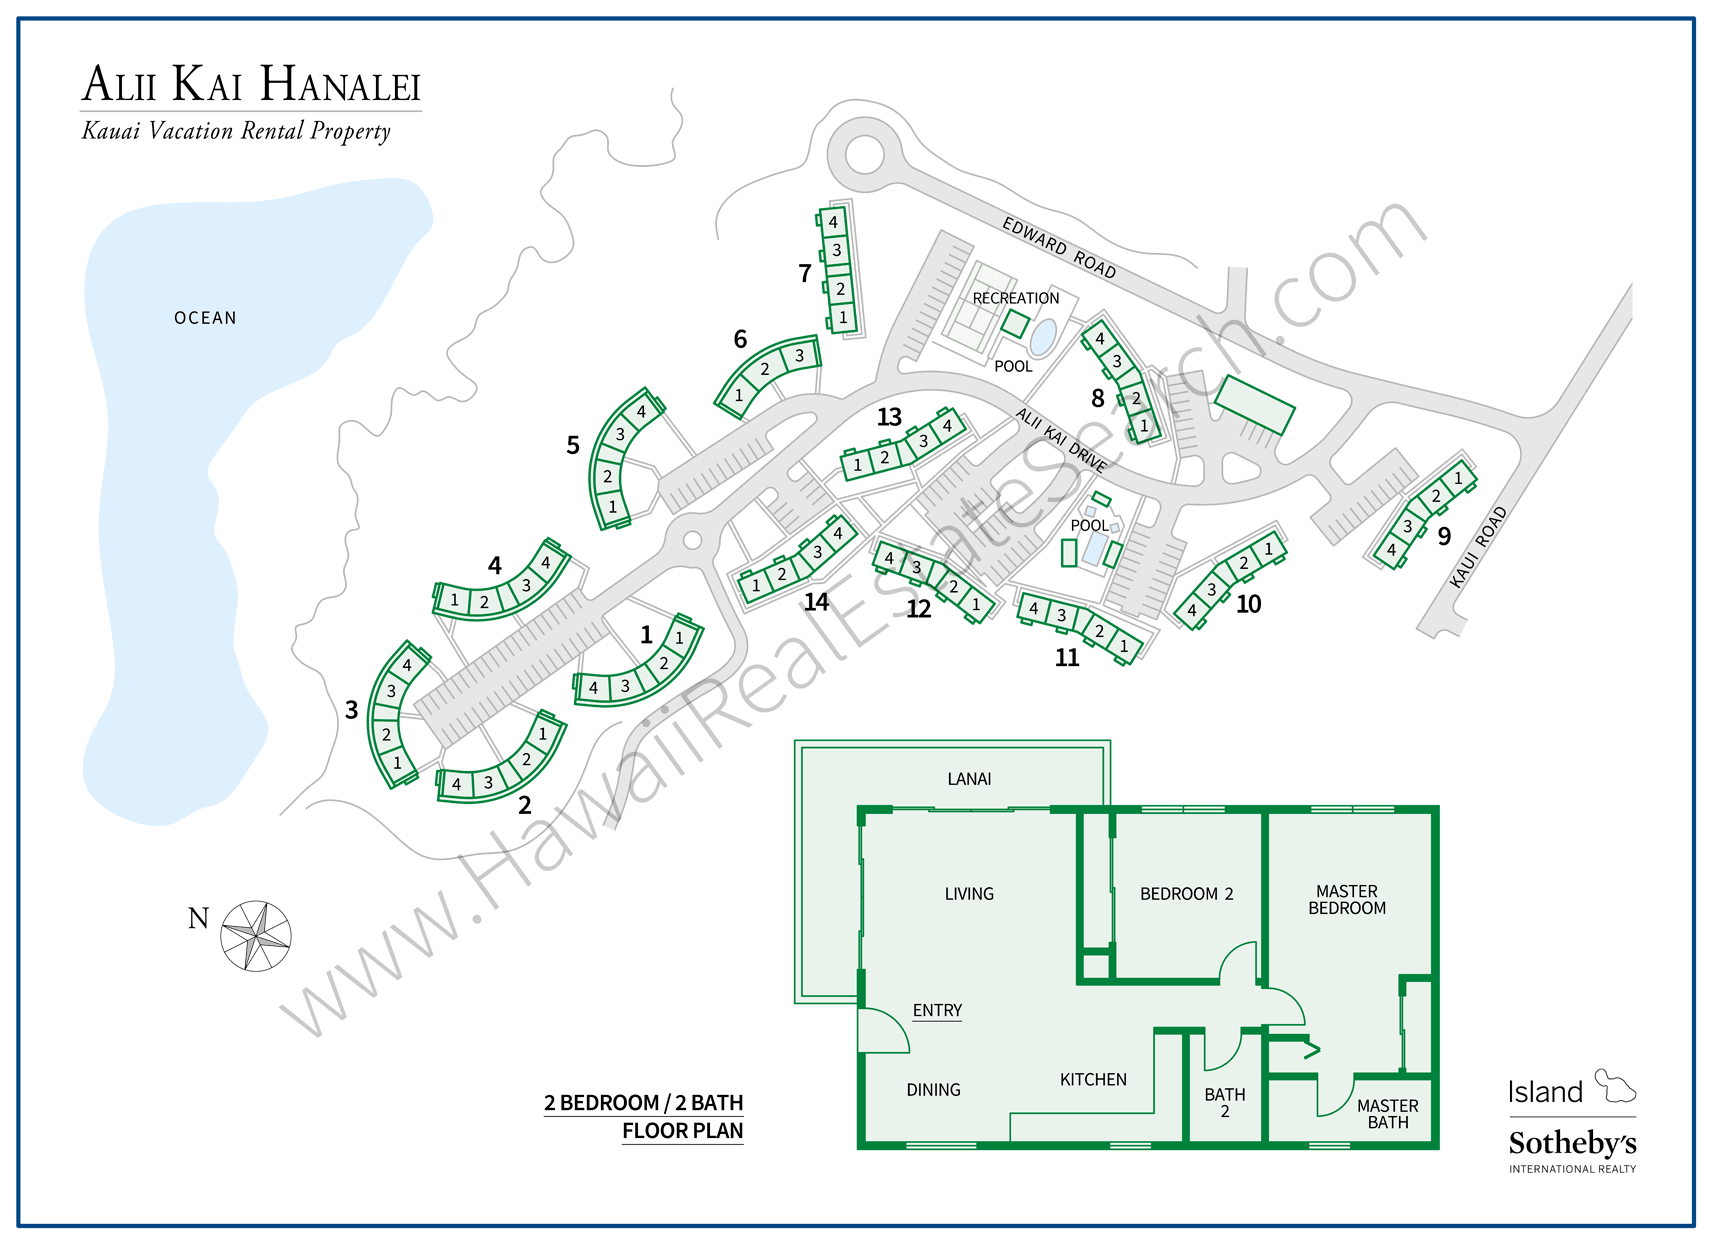 Alii Kai at Hanalei Property Map updated